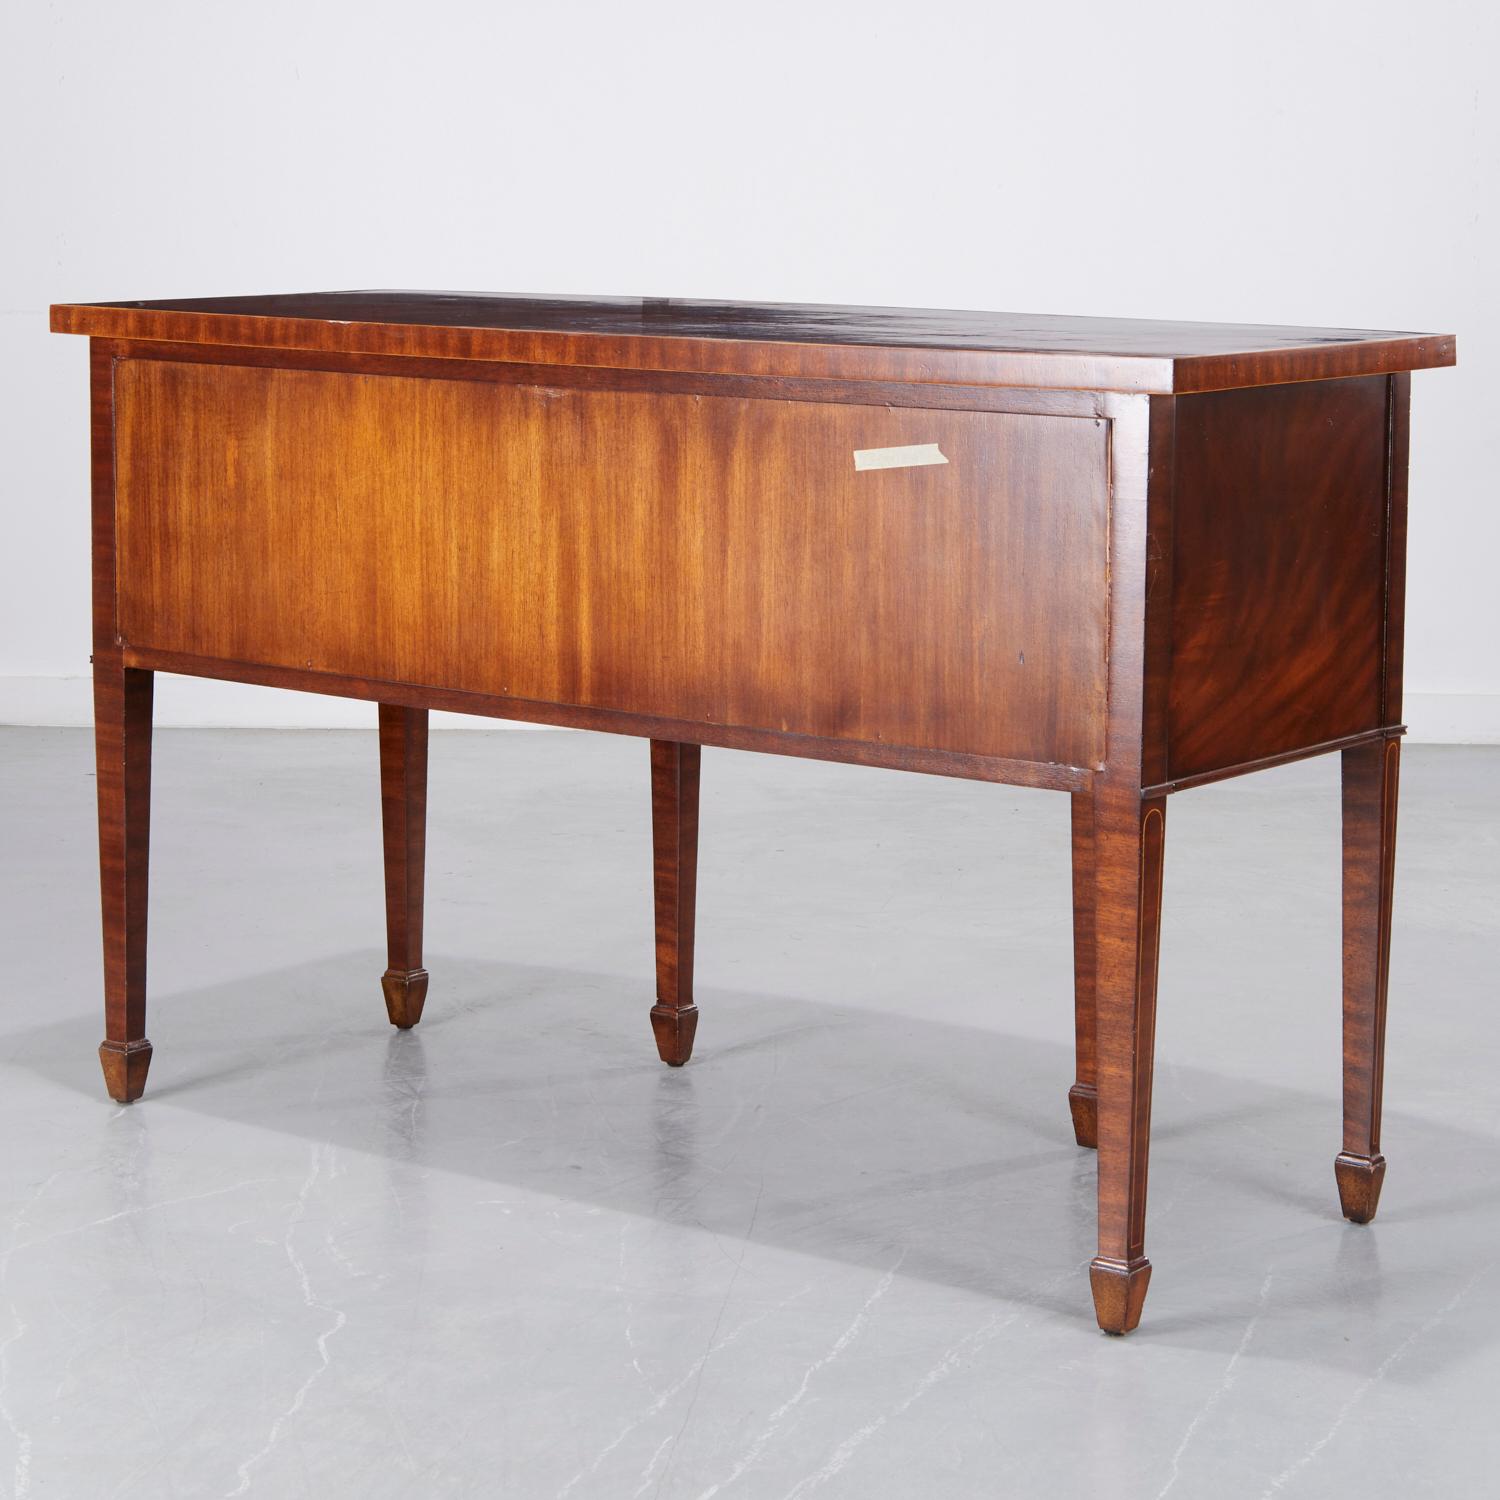 20th C. Three Drawer Georgian Style Mahogany Sideboard with Inlaid Stringing In Good Condition For Sale In Morristown, NJ